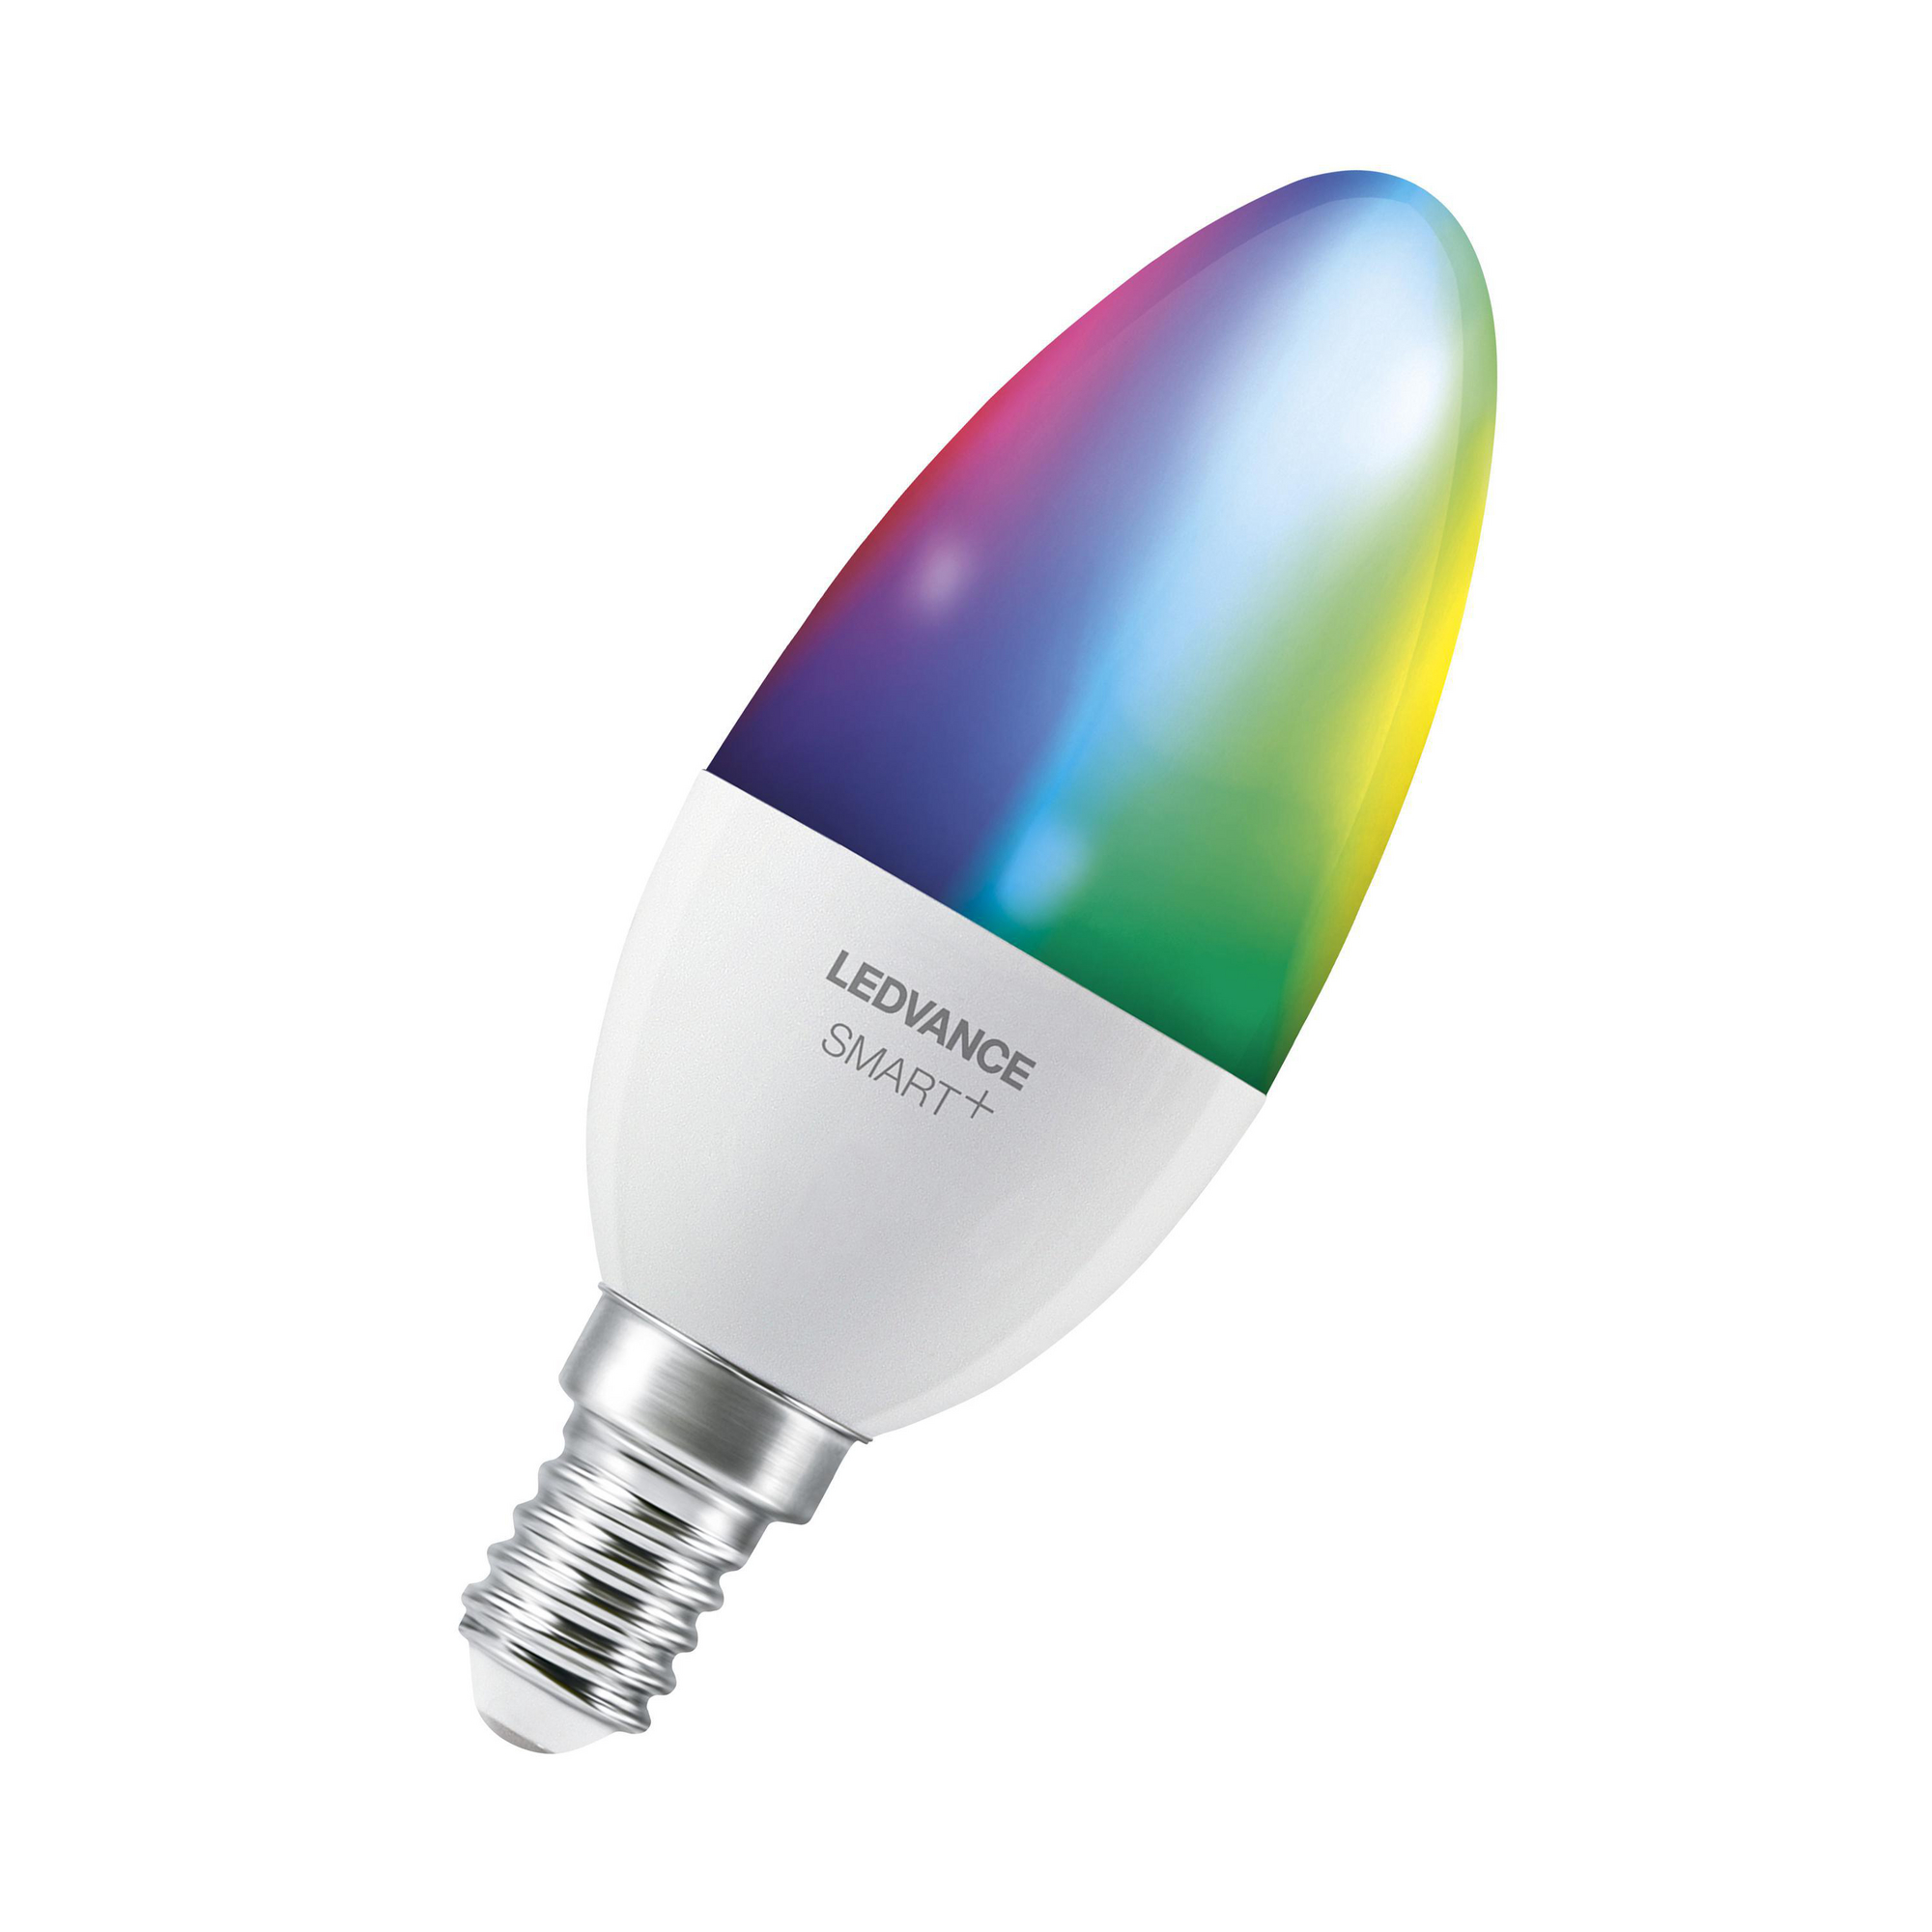 LED-Lampe 'Smart+' 10,7 cm 470 lm 5 W E14 weiß WLAN Tunable White 3 Stk. + product picture